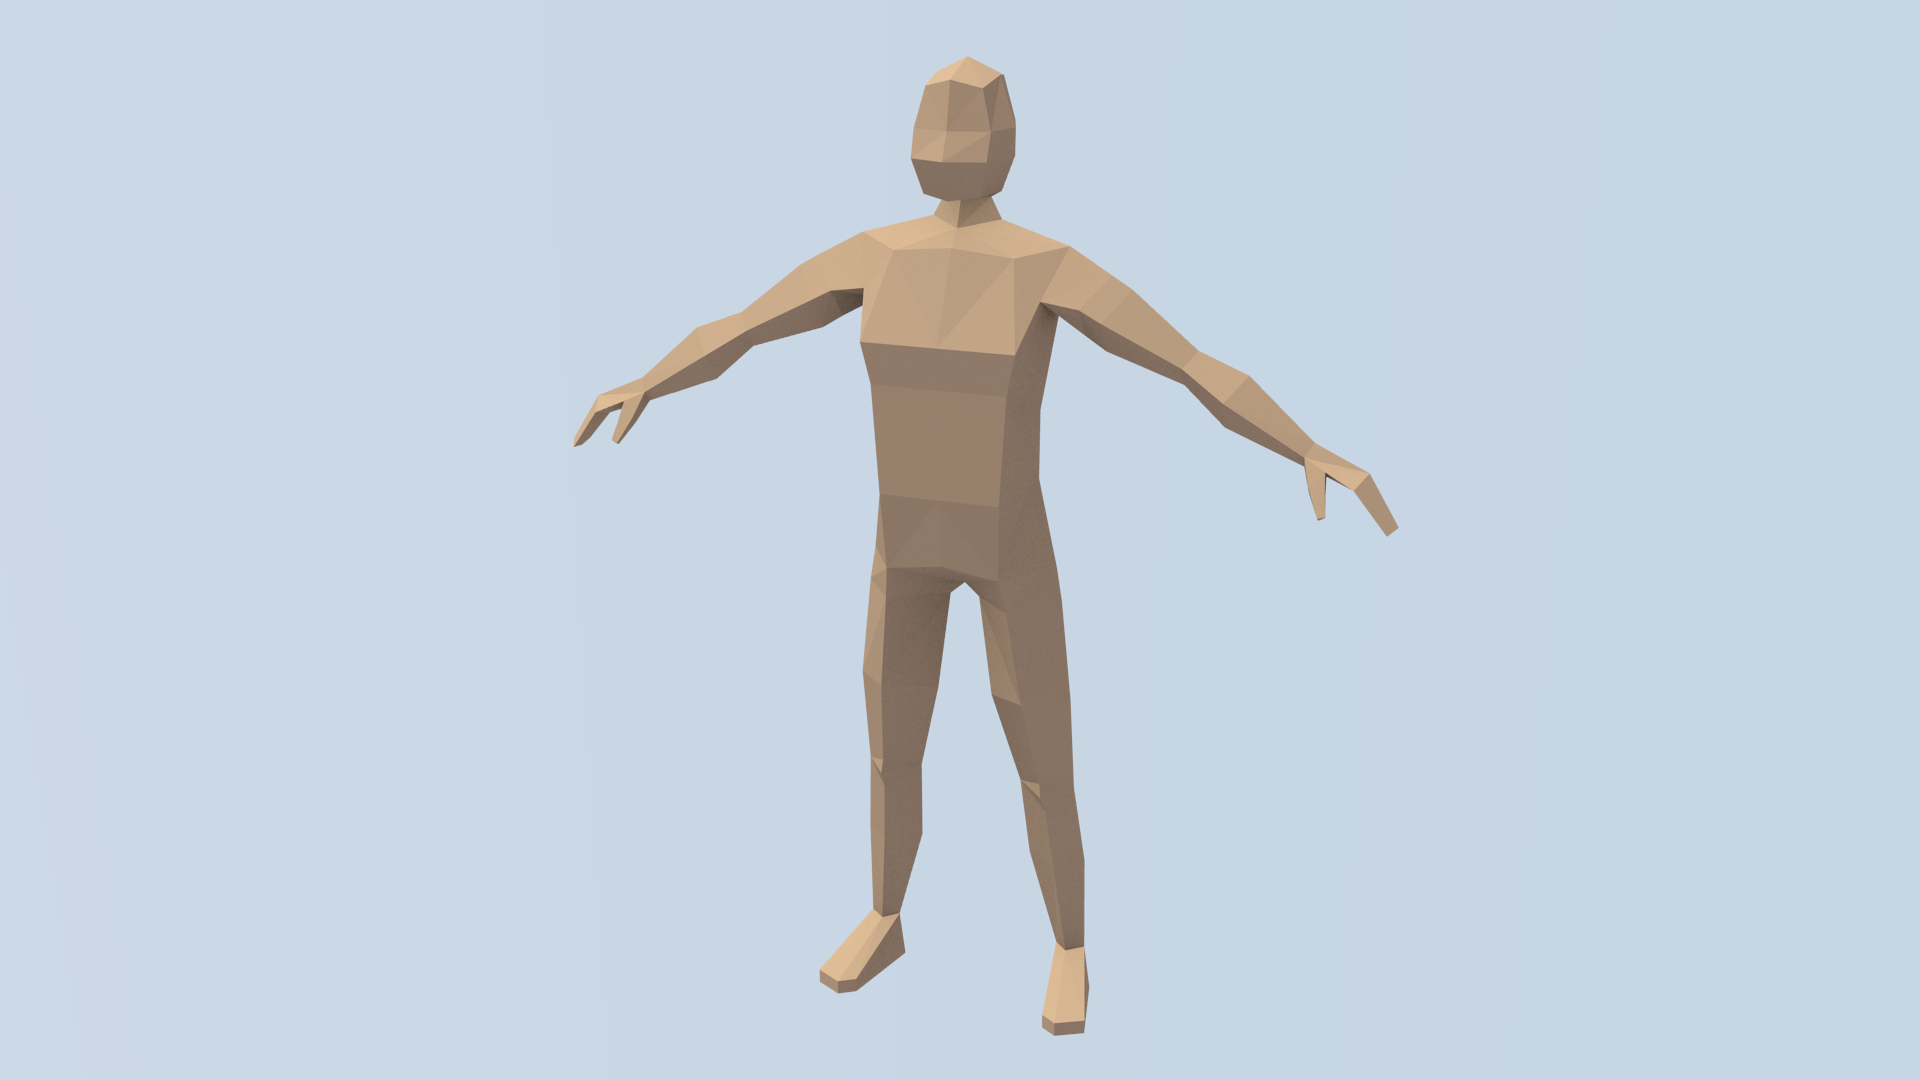 Low Poly character basemesh | OpenGameArt.org